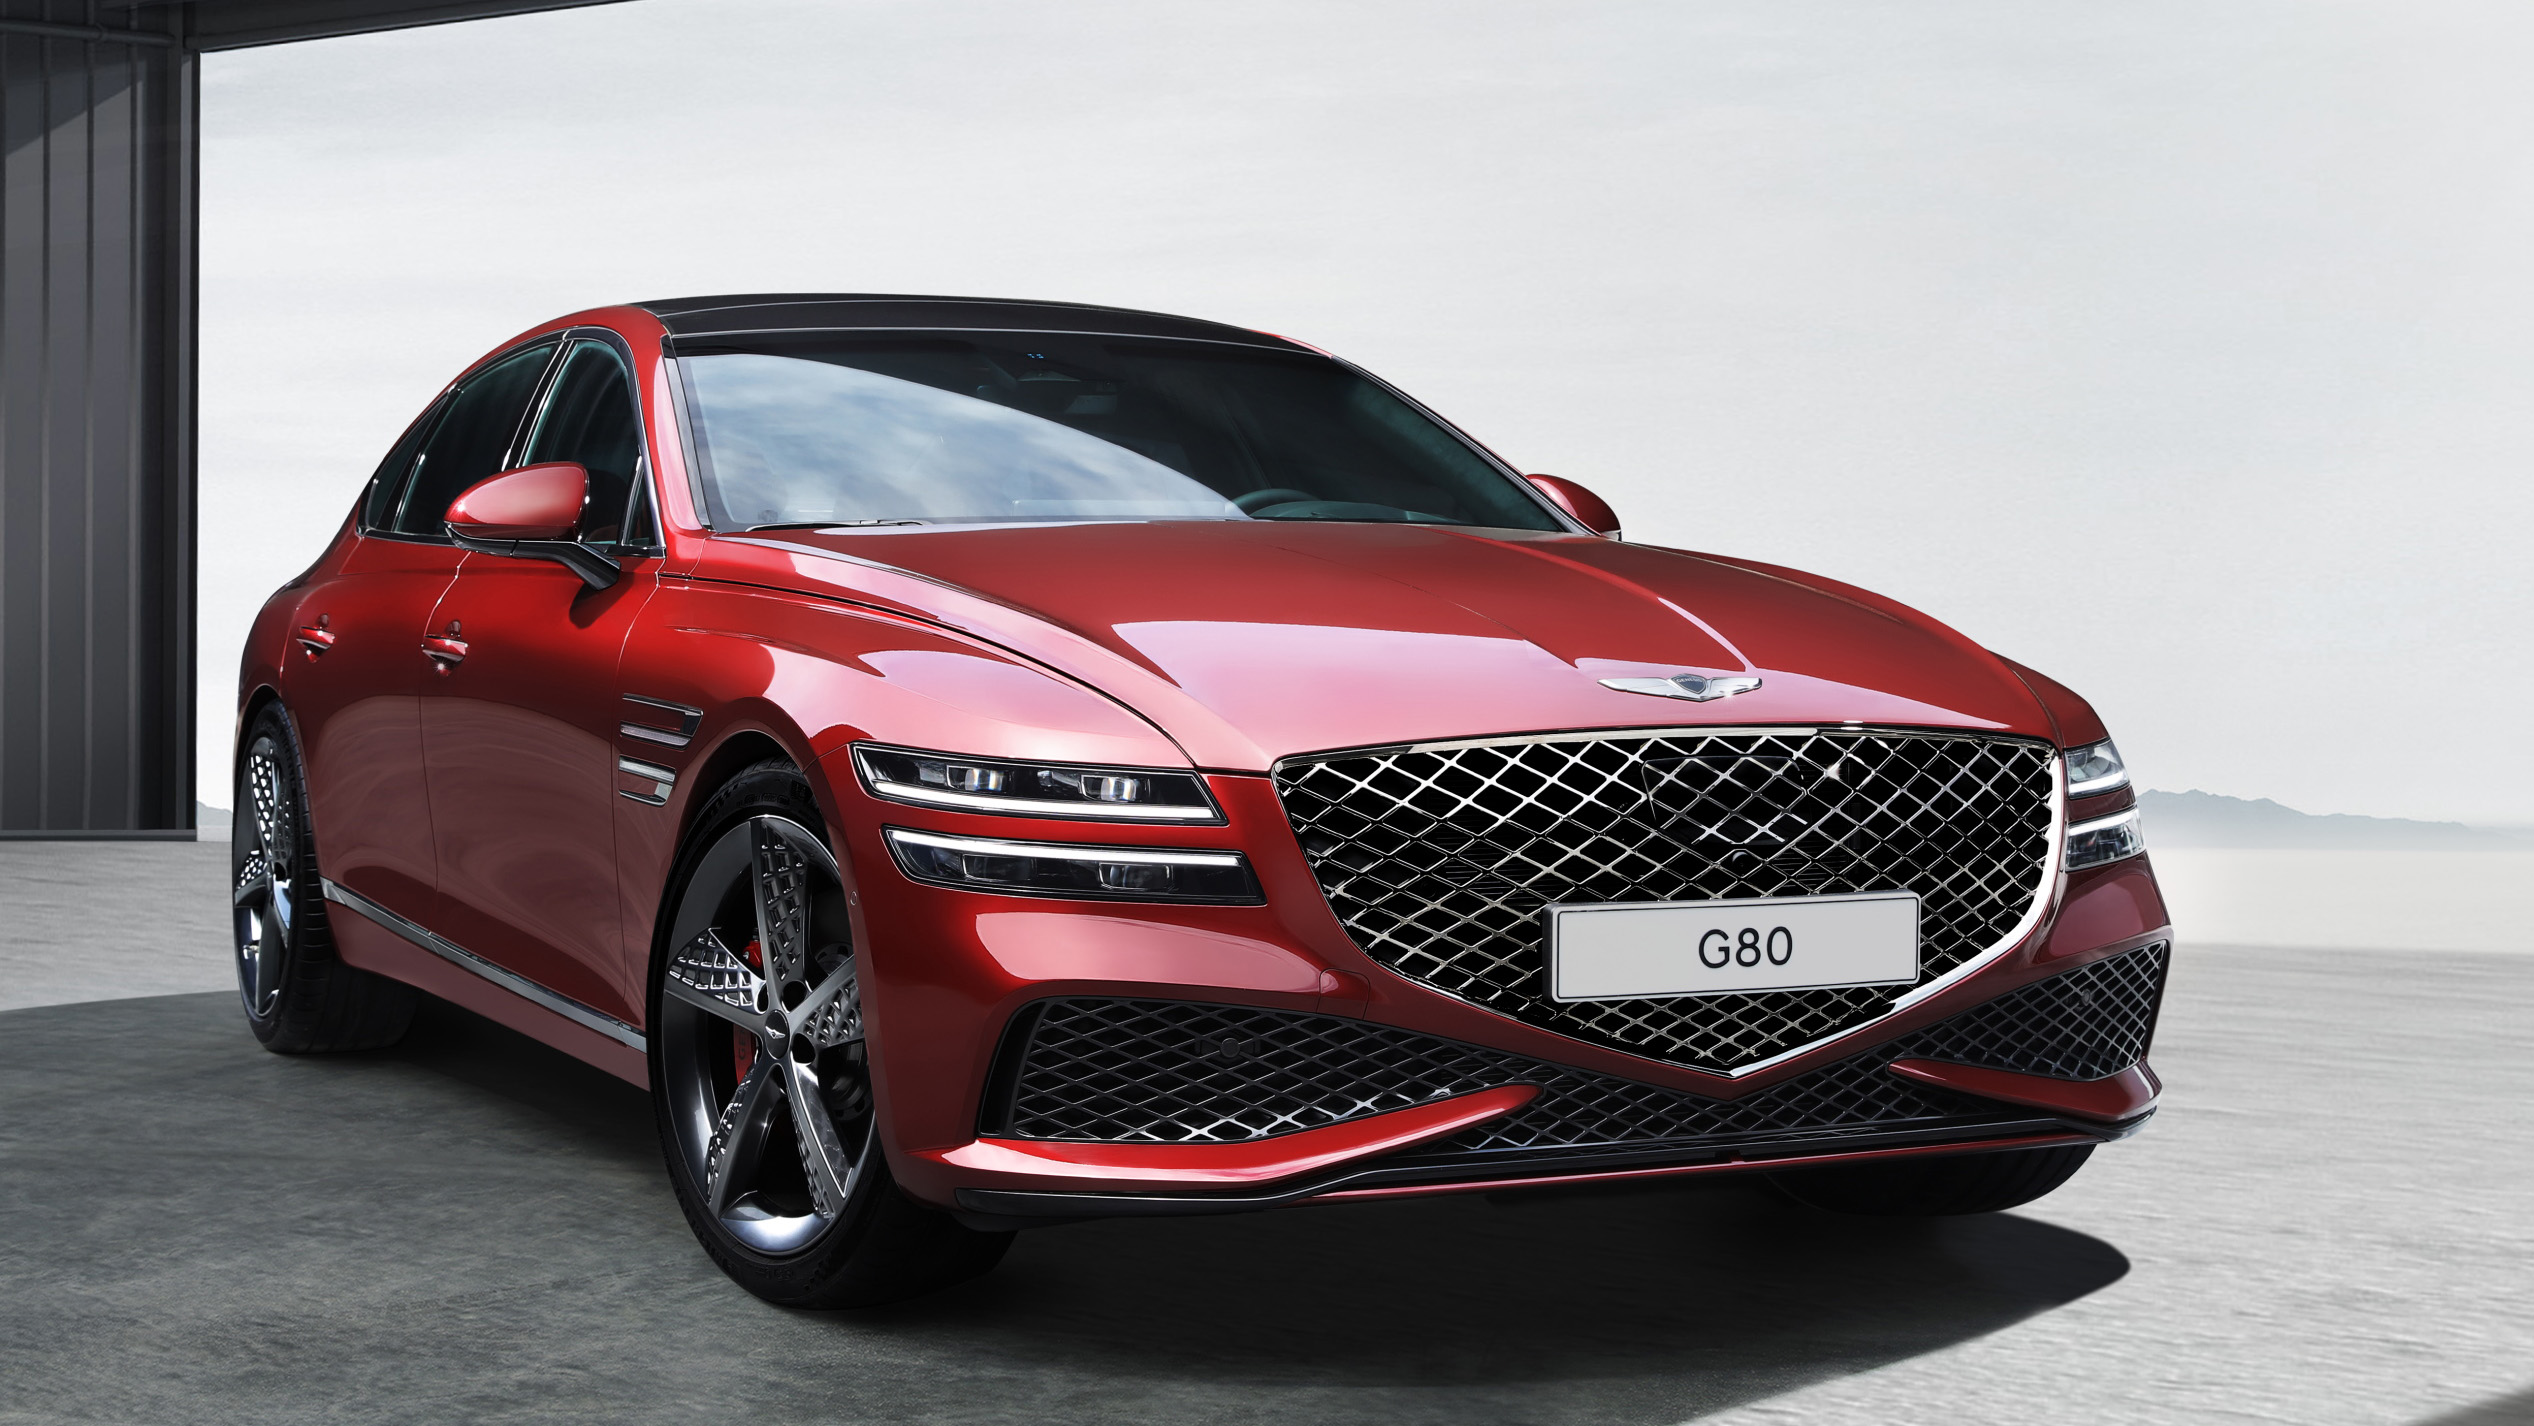 2022 Genesis G80 Sport model shown for the first time Autoblog